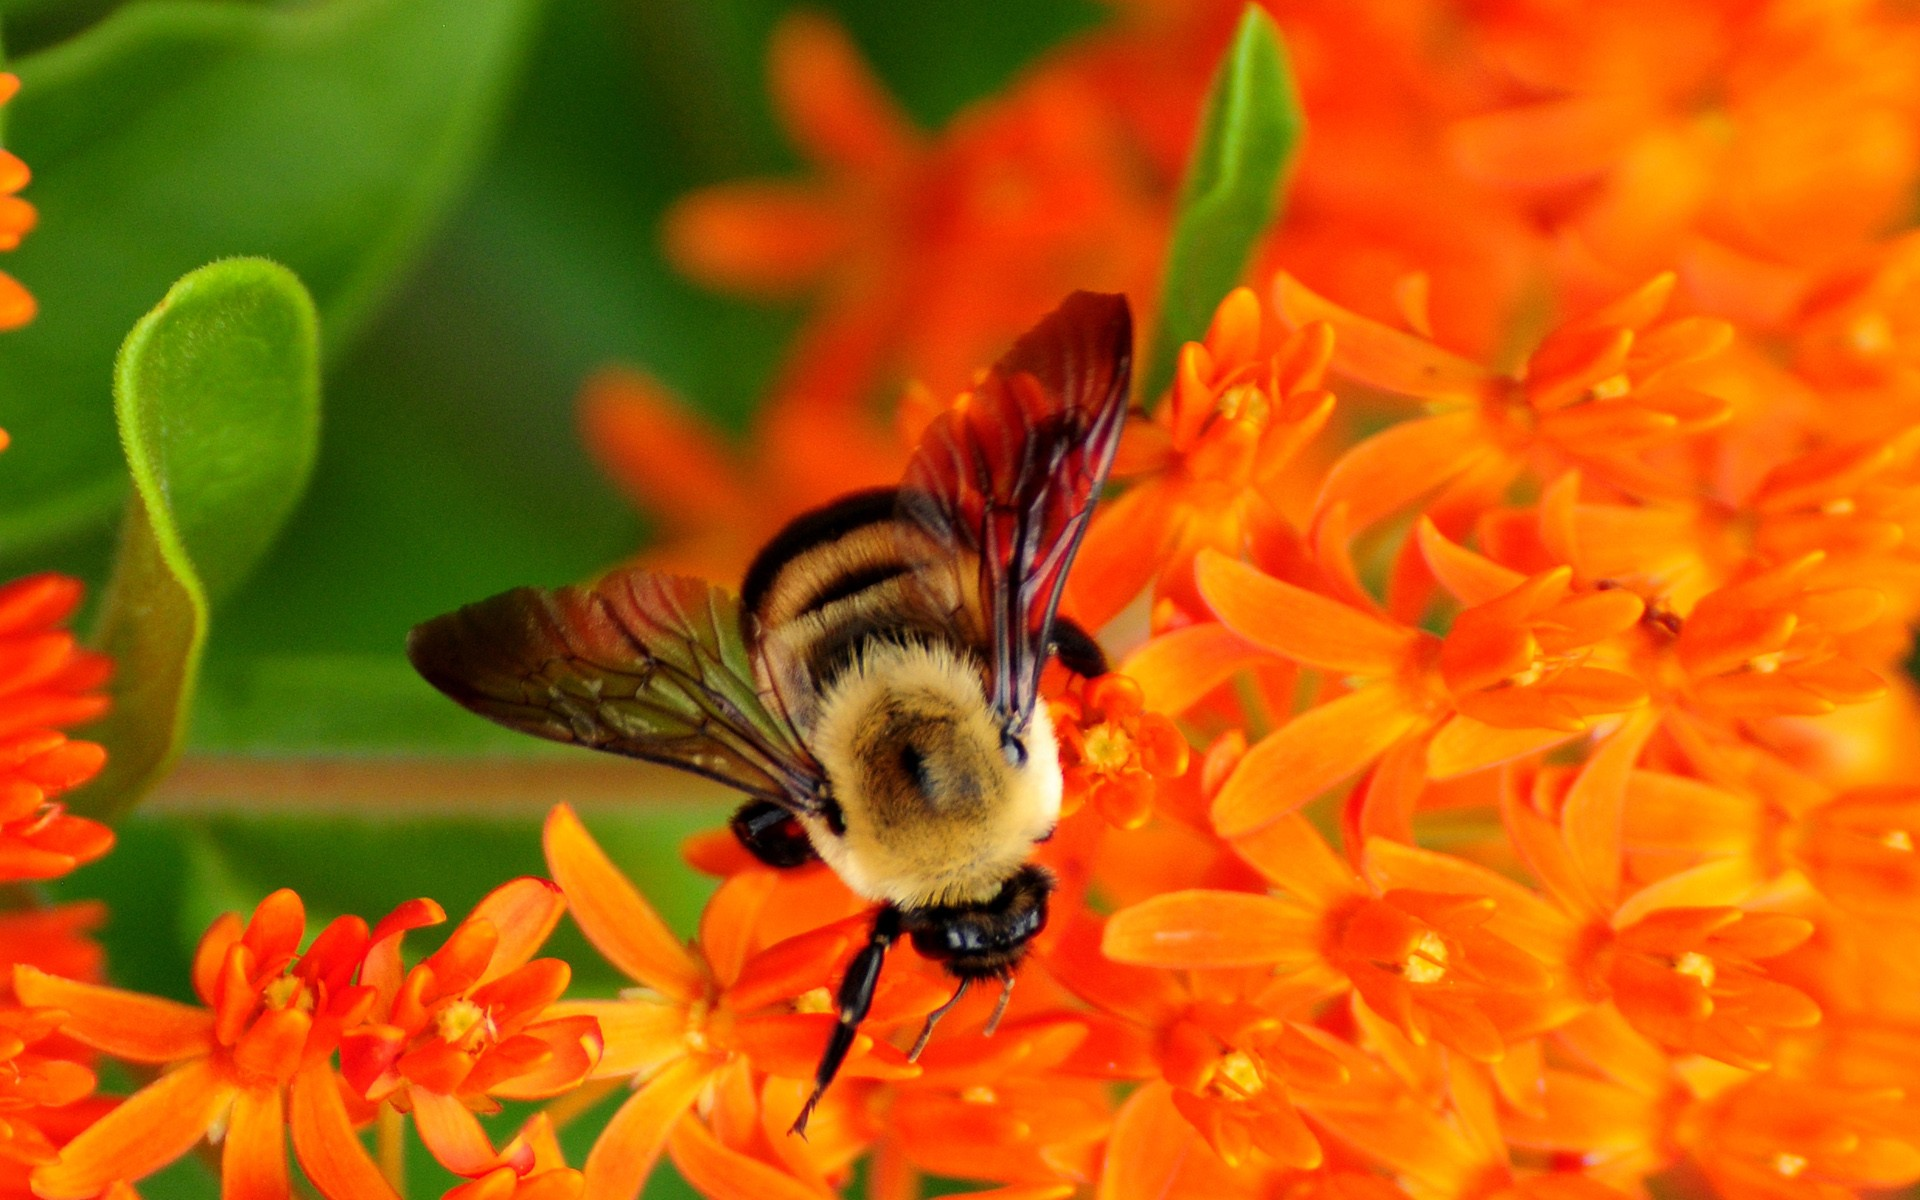 Images of bumble bees | Bumble Bee on Flowers - Wallpaper #33987 ...